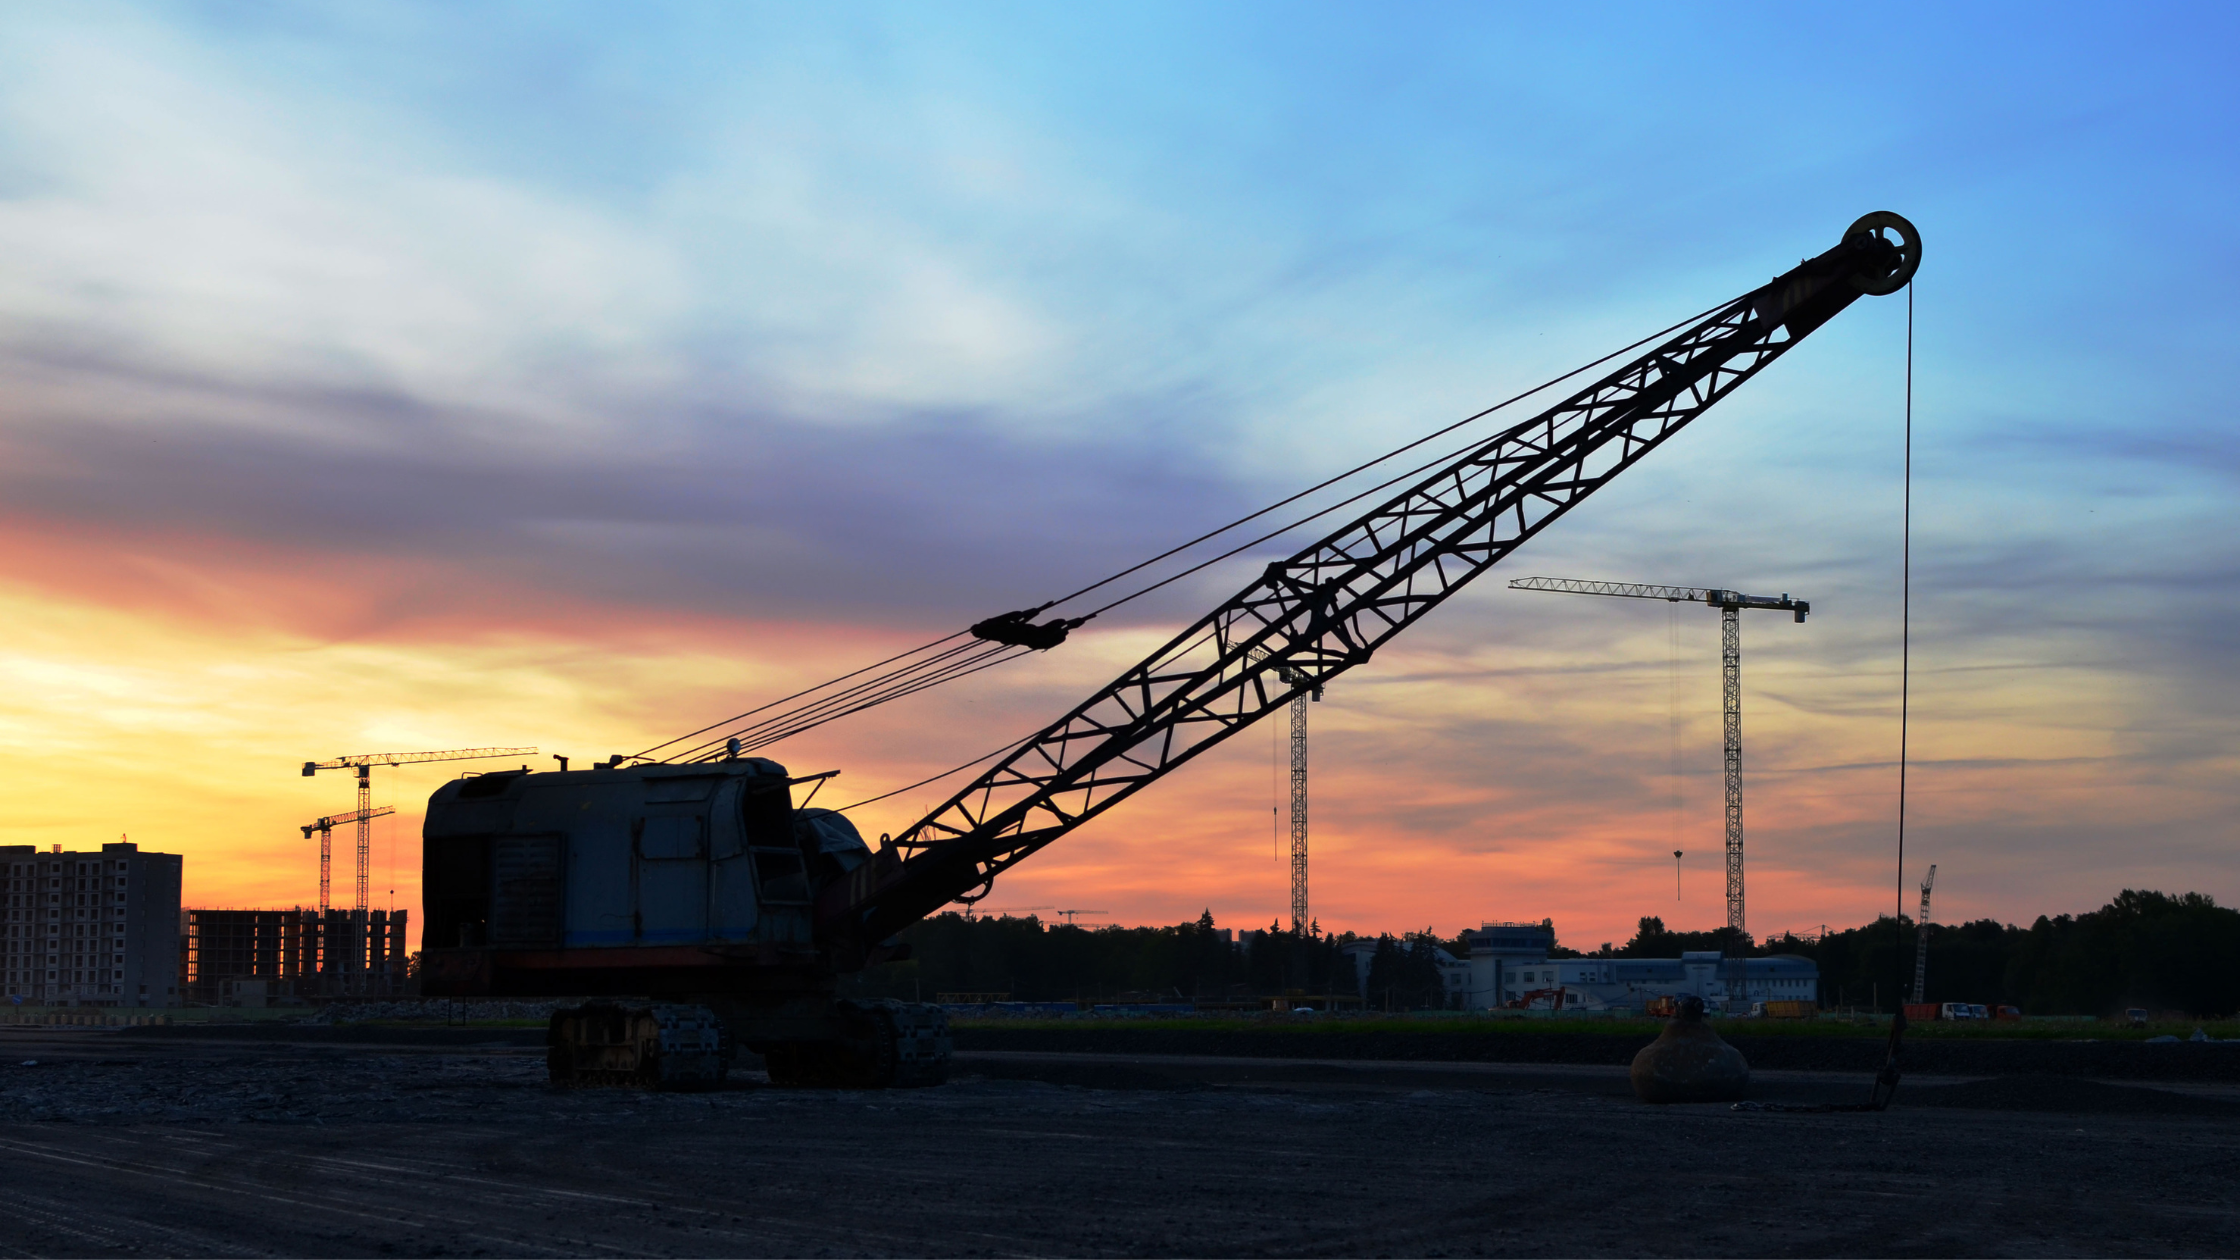 Dragline in front of a sunset